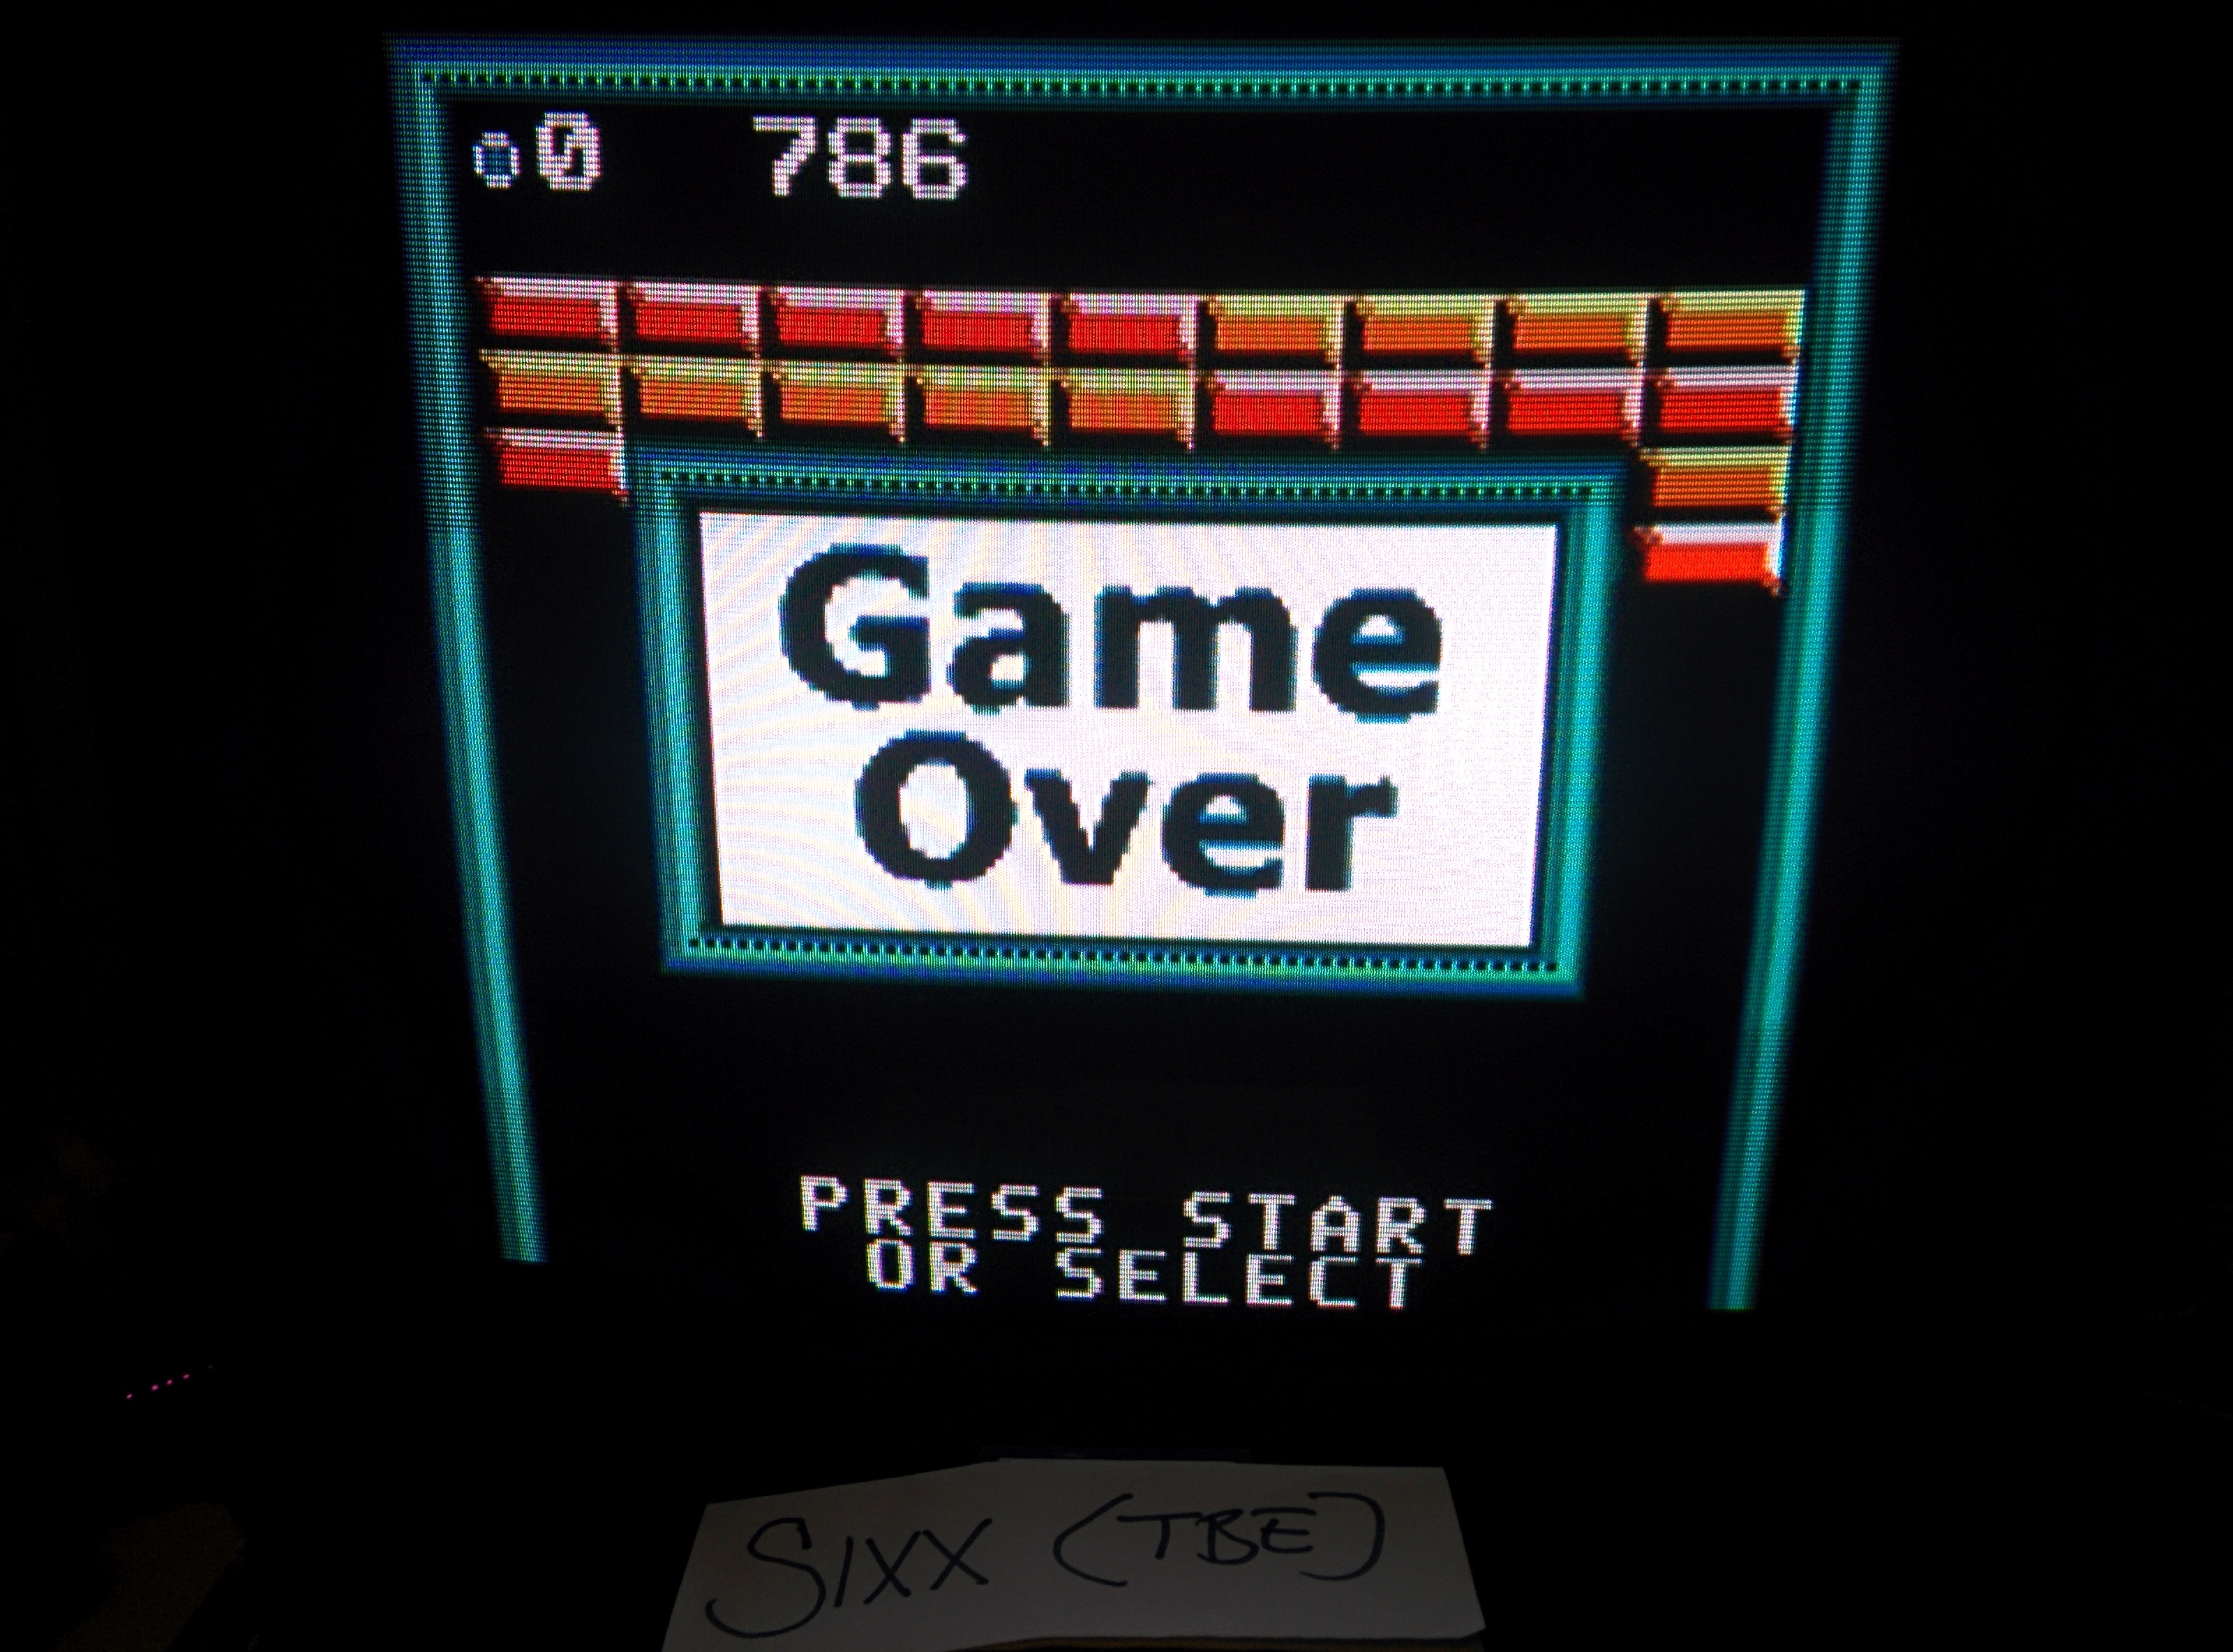 Sixx: Super Breakout: Regular (Game Boy Color Emulated) 786 points on 2014-07-15 15:56:13